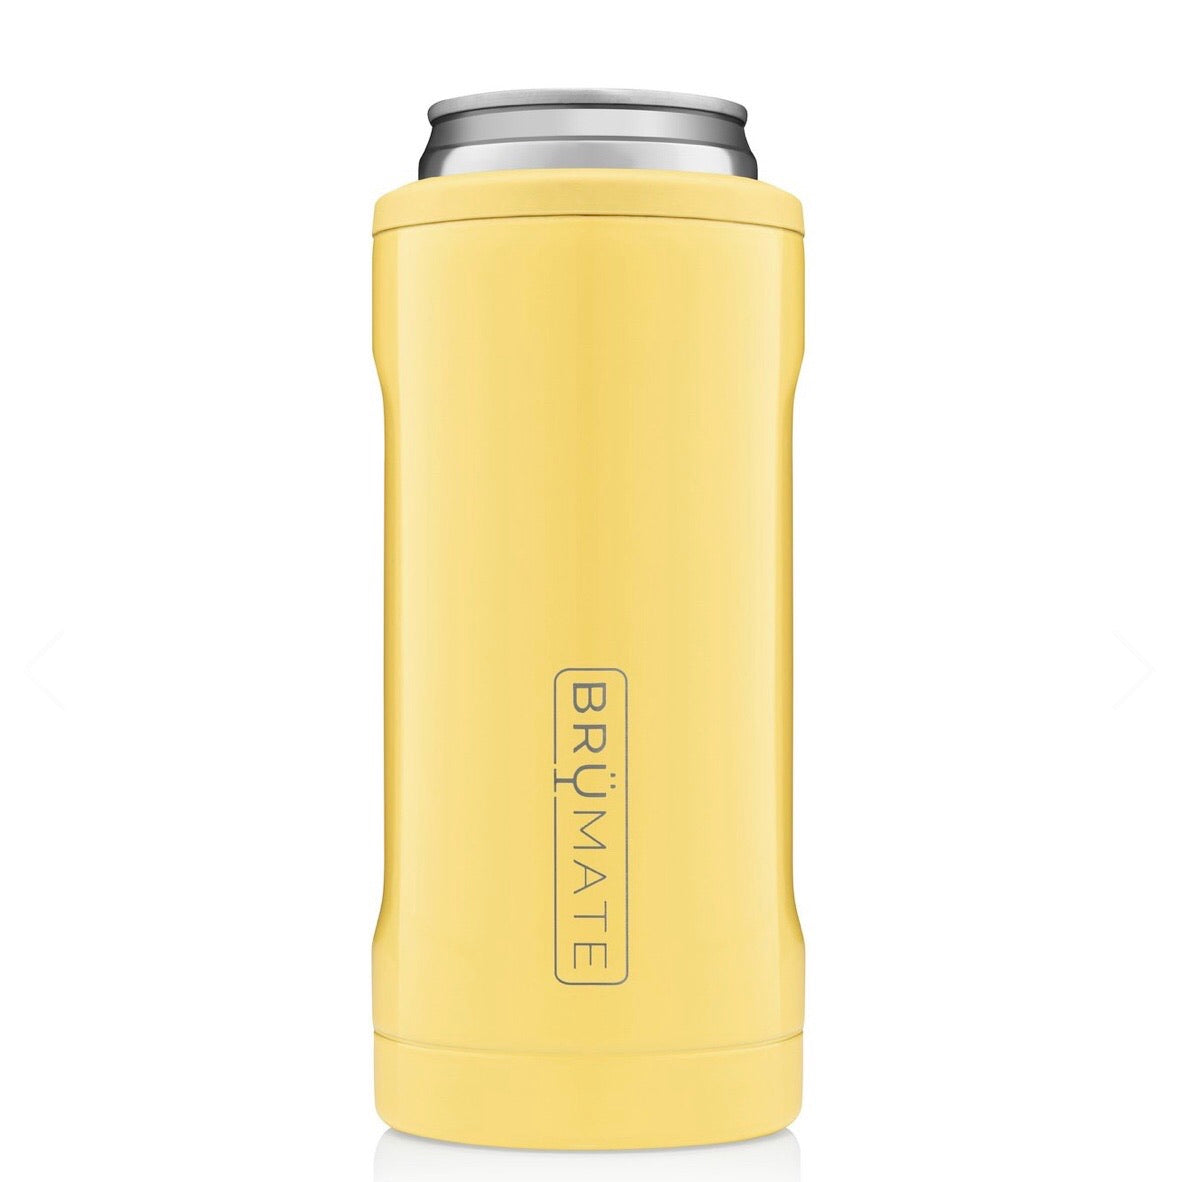 slim cans leak-proof drinkware hot to cold insulated drinkware tumbler like yeti brumate spillproof yellow